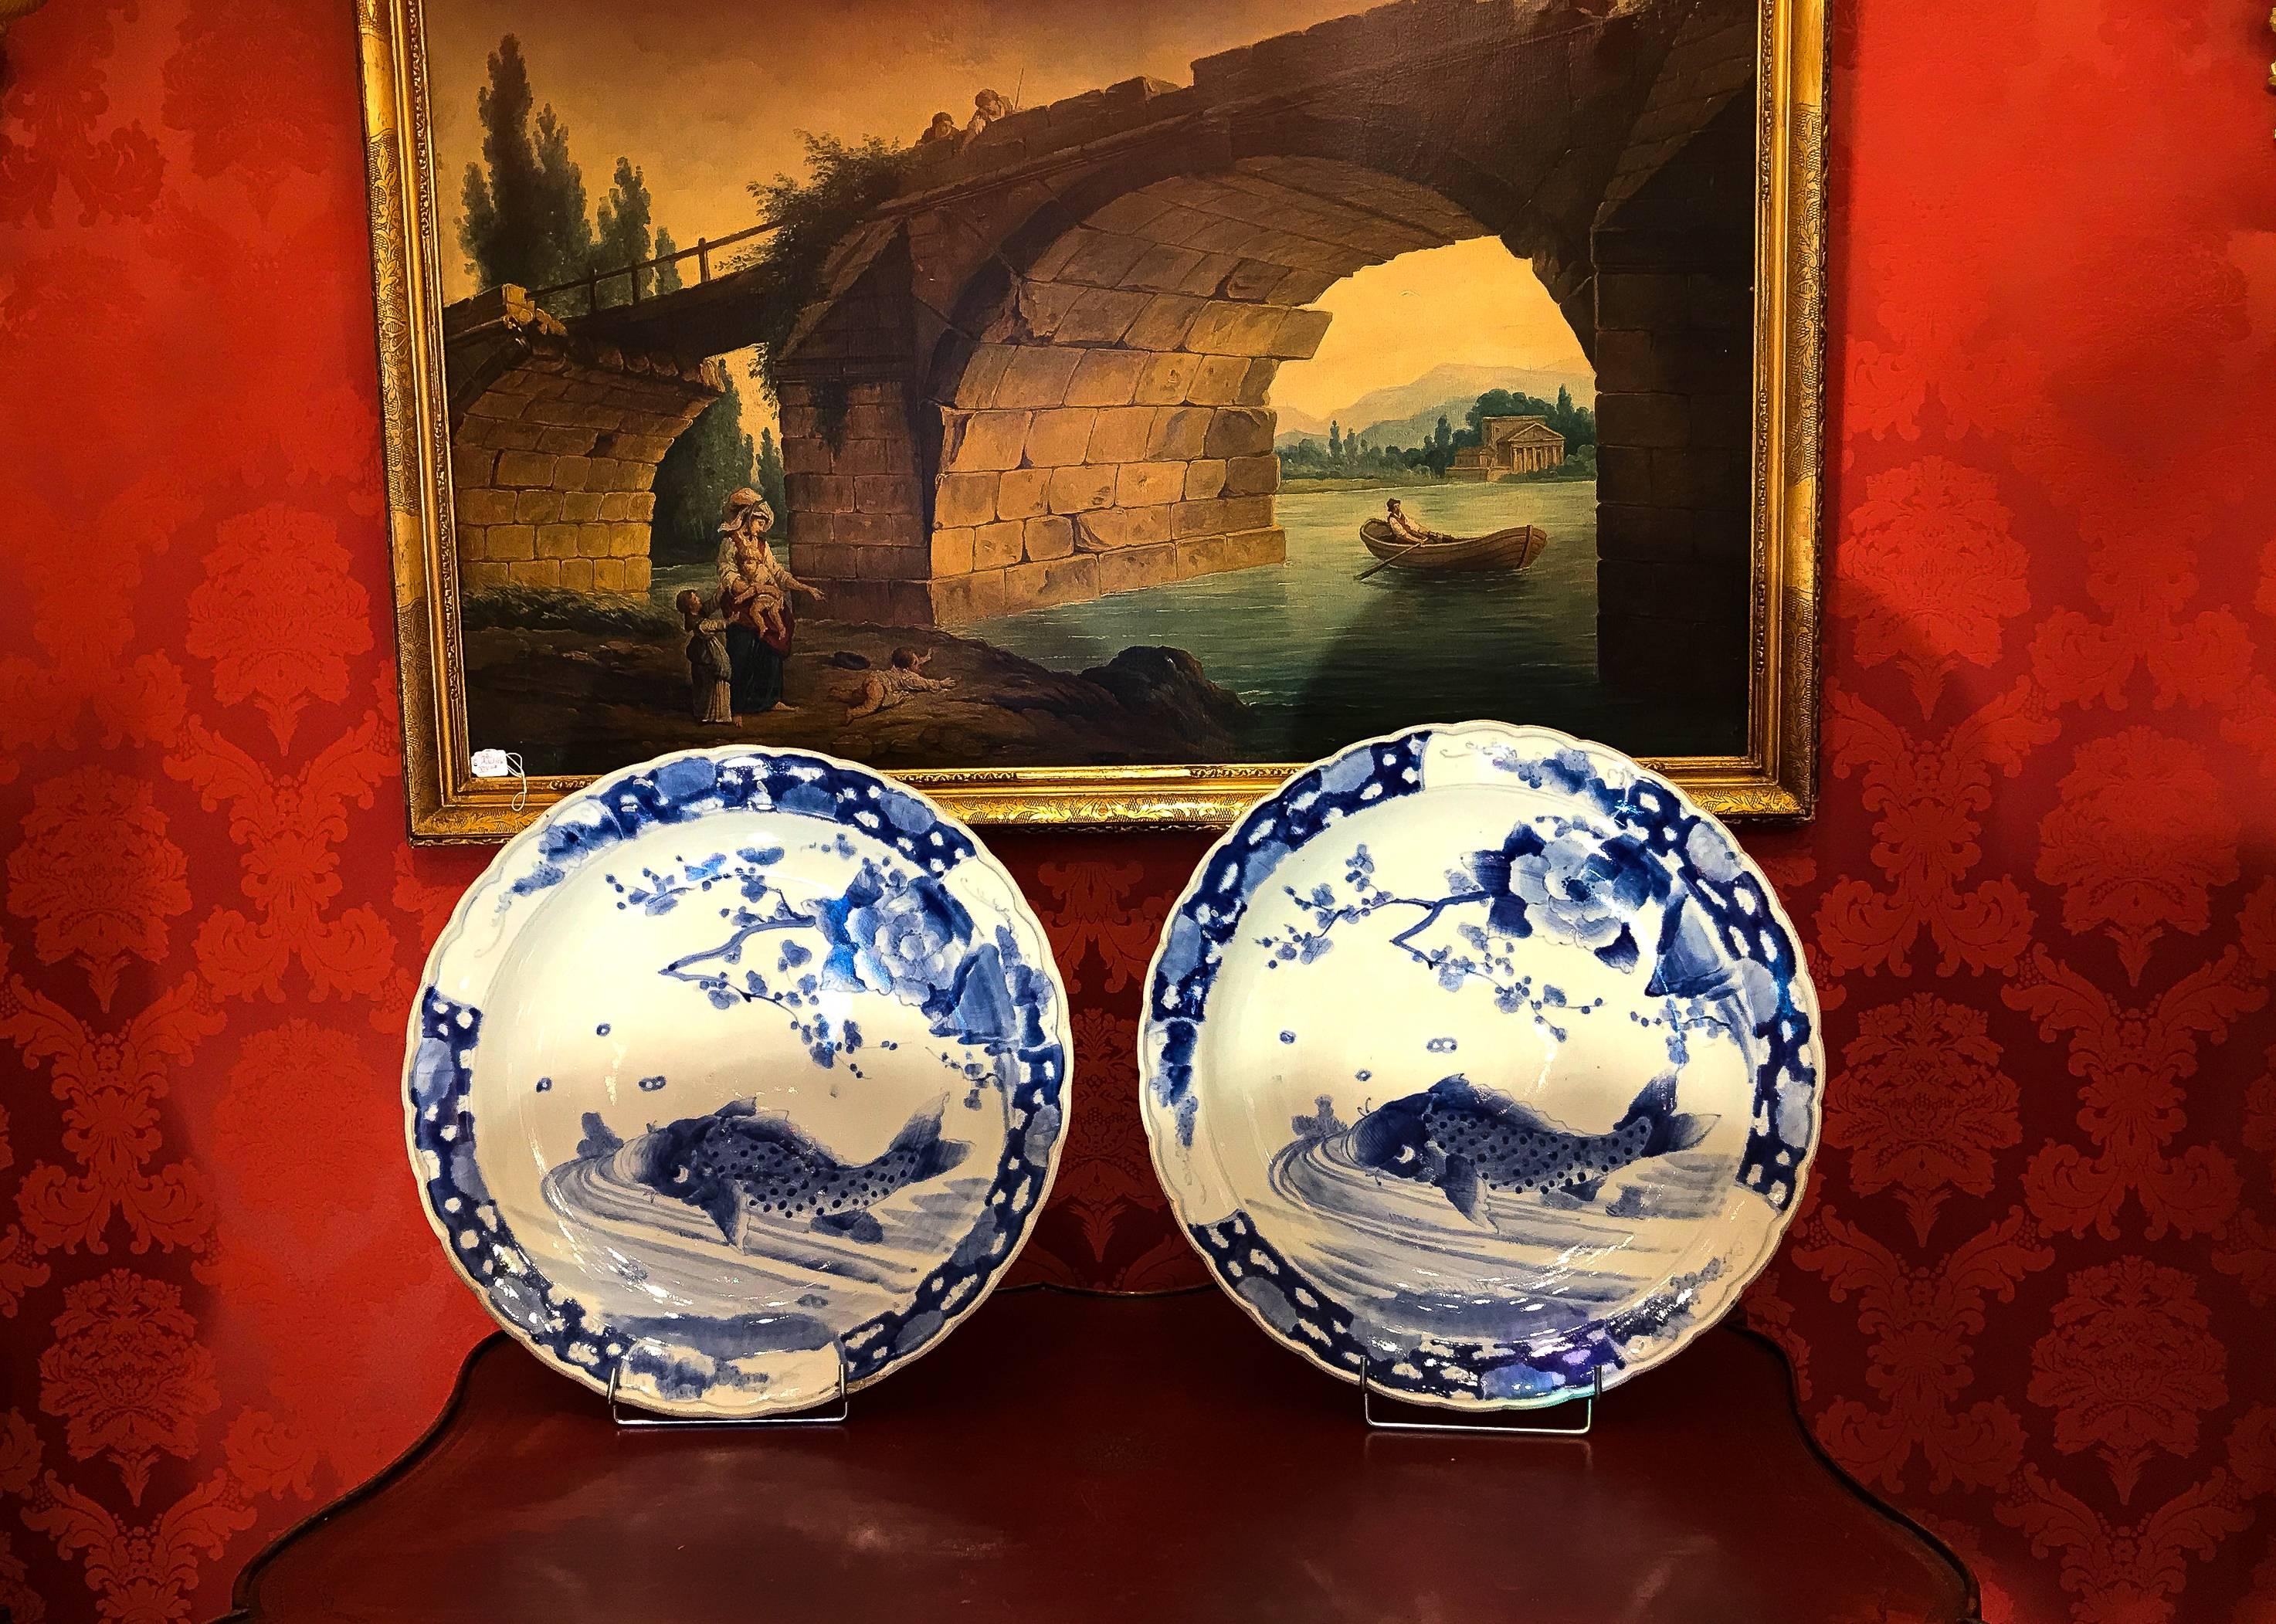 A magnificent large pair of 19th century Japan porcelain dishes, depicting Koï carps in hand painted in underglaze blue cobalt color.
Beautiful work by Arita porcelain manufactures, probably Meiji period, mid-19th century.

Measurment: Diameter